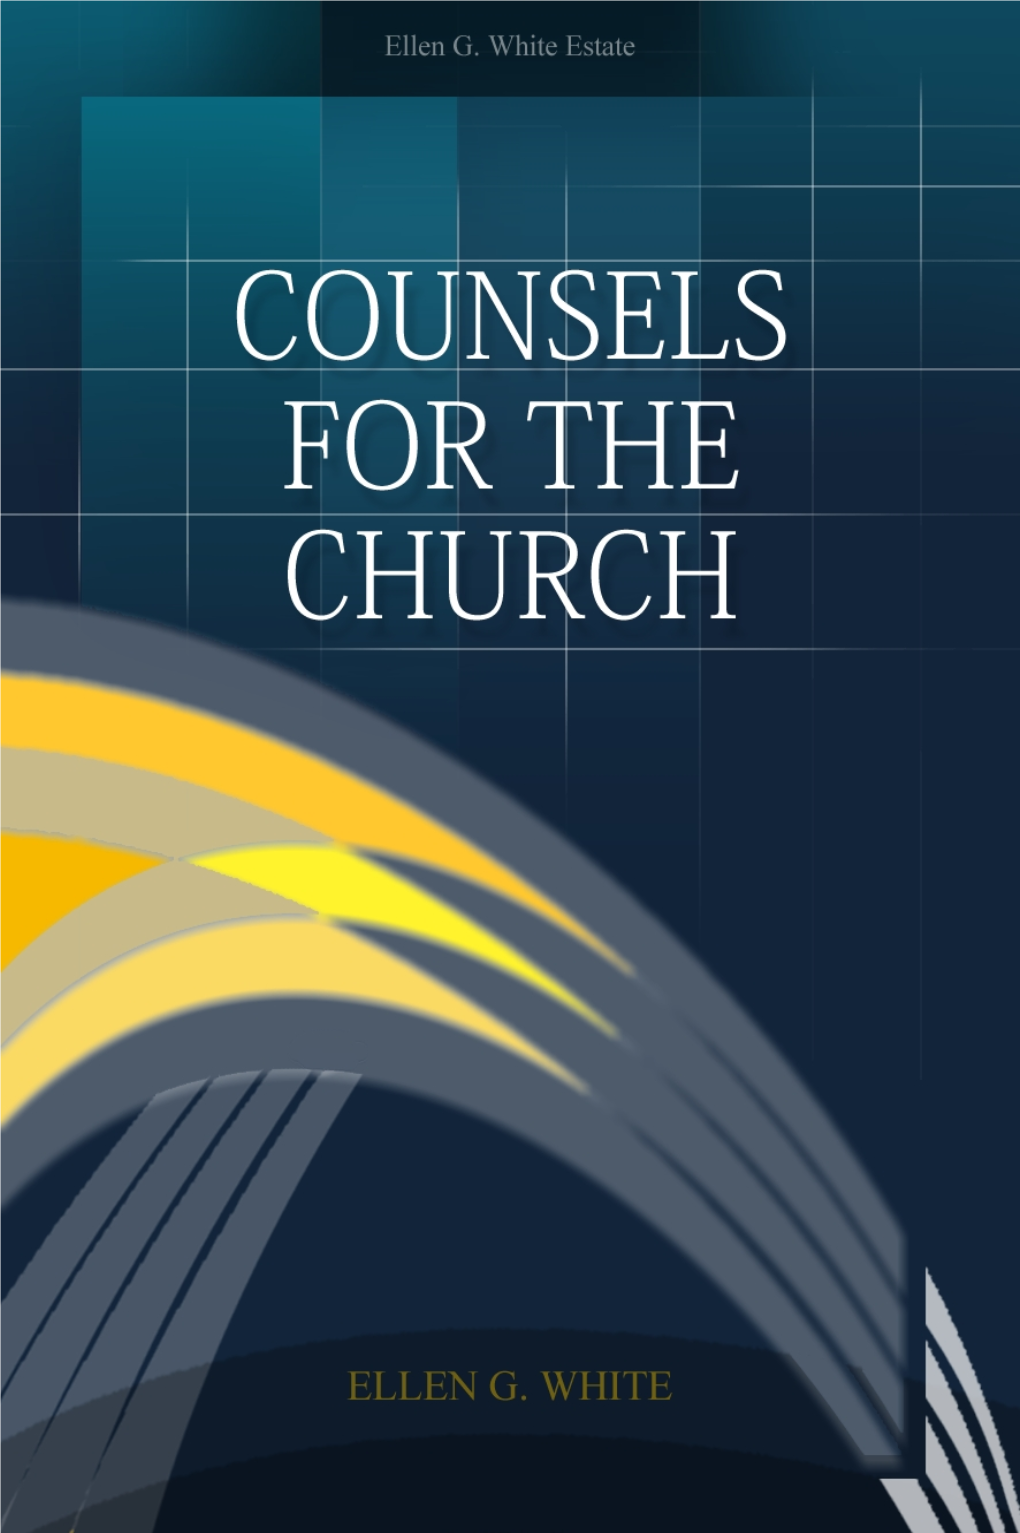 Counsels for the Church.Pdf